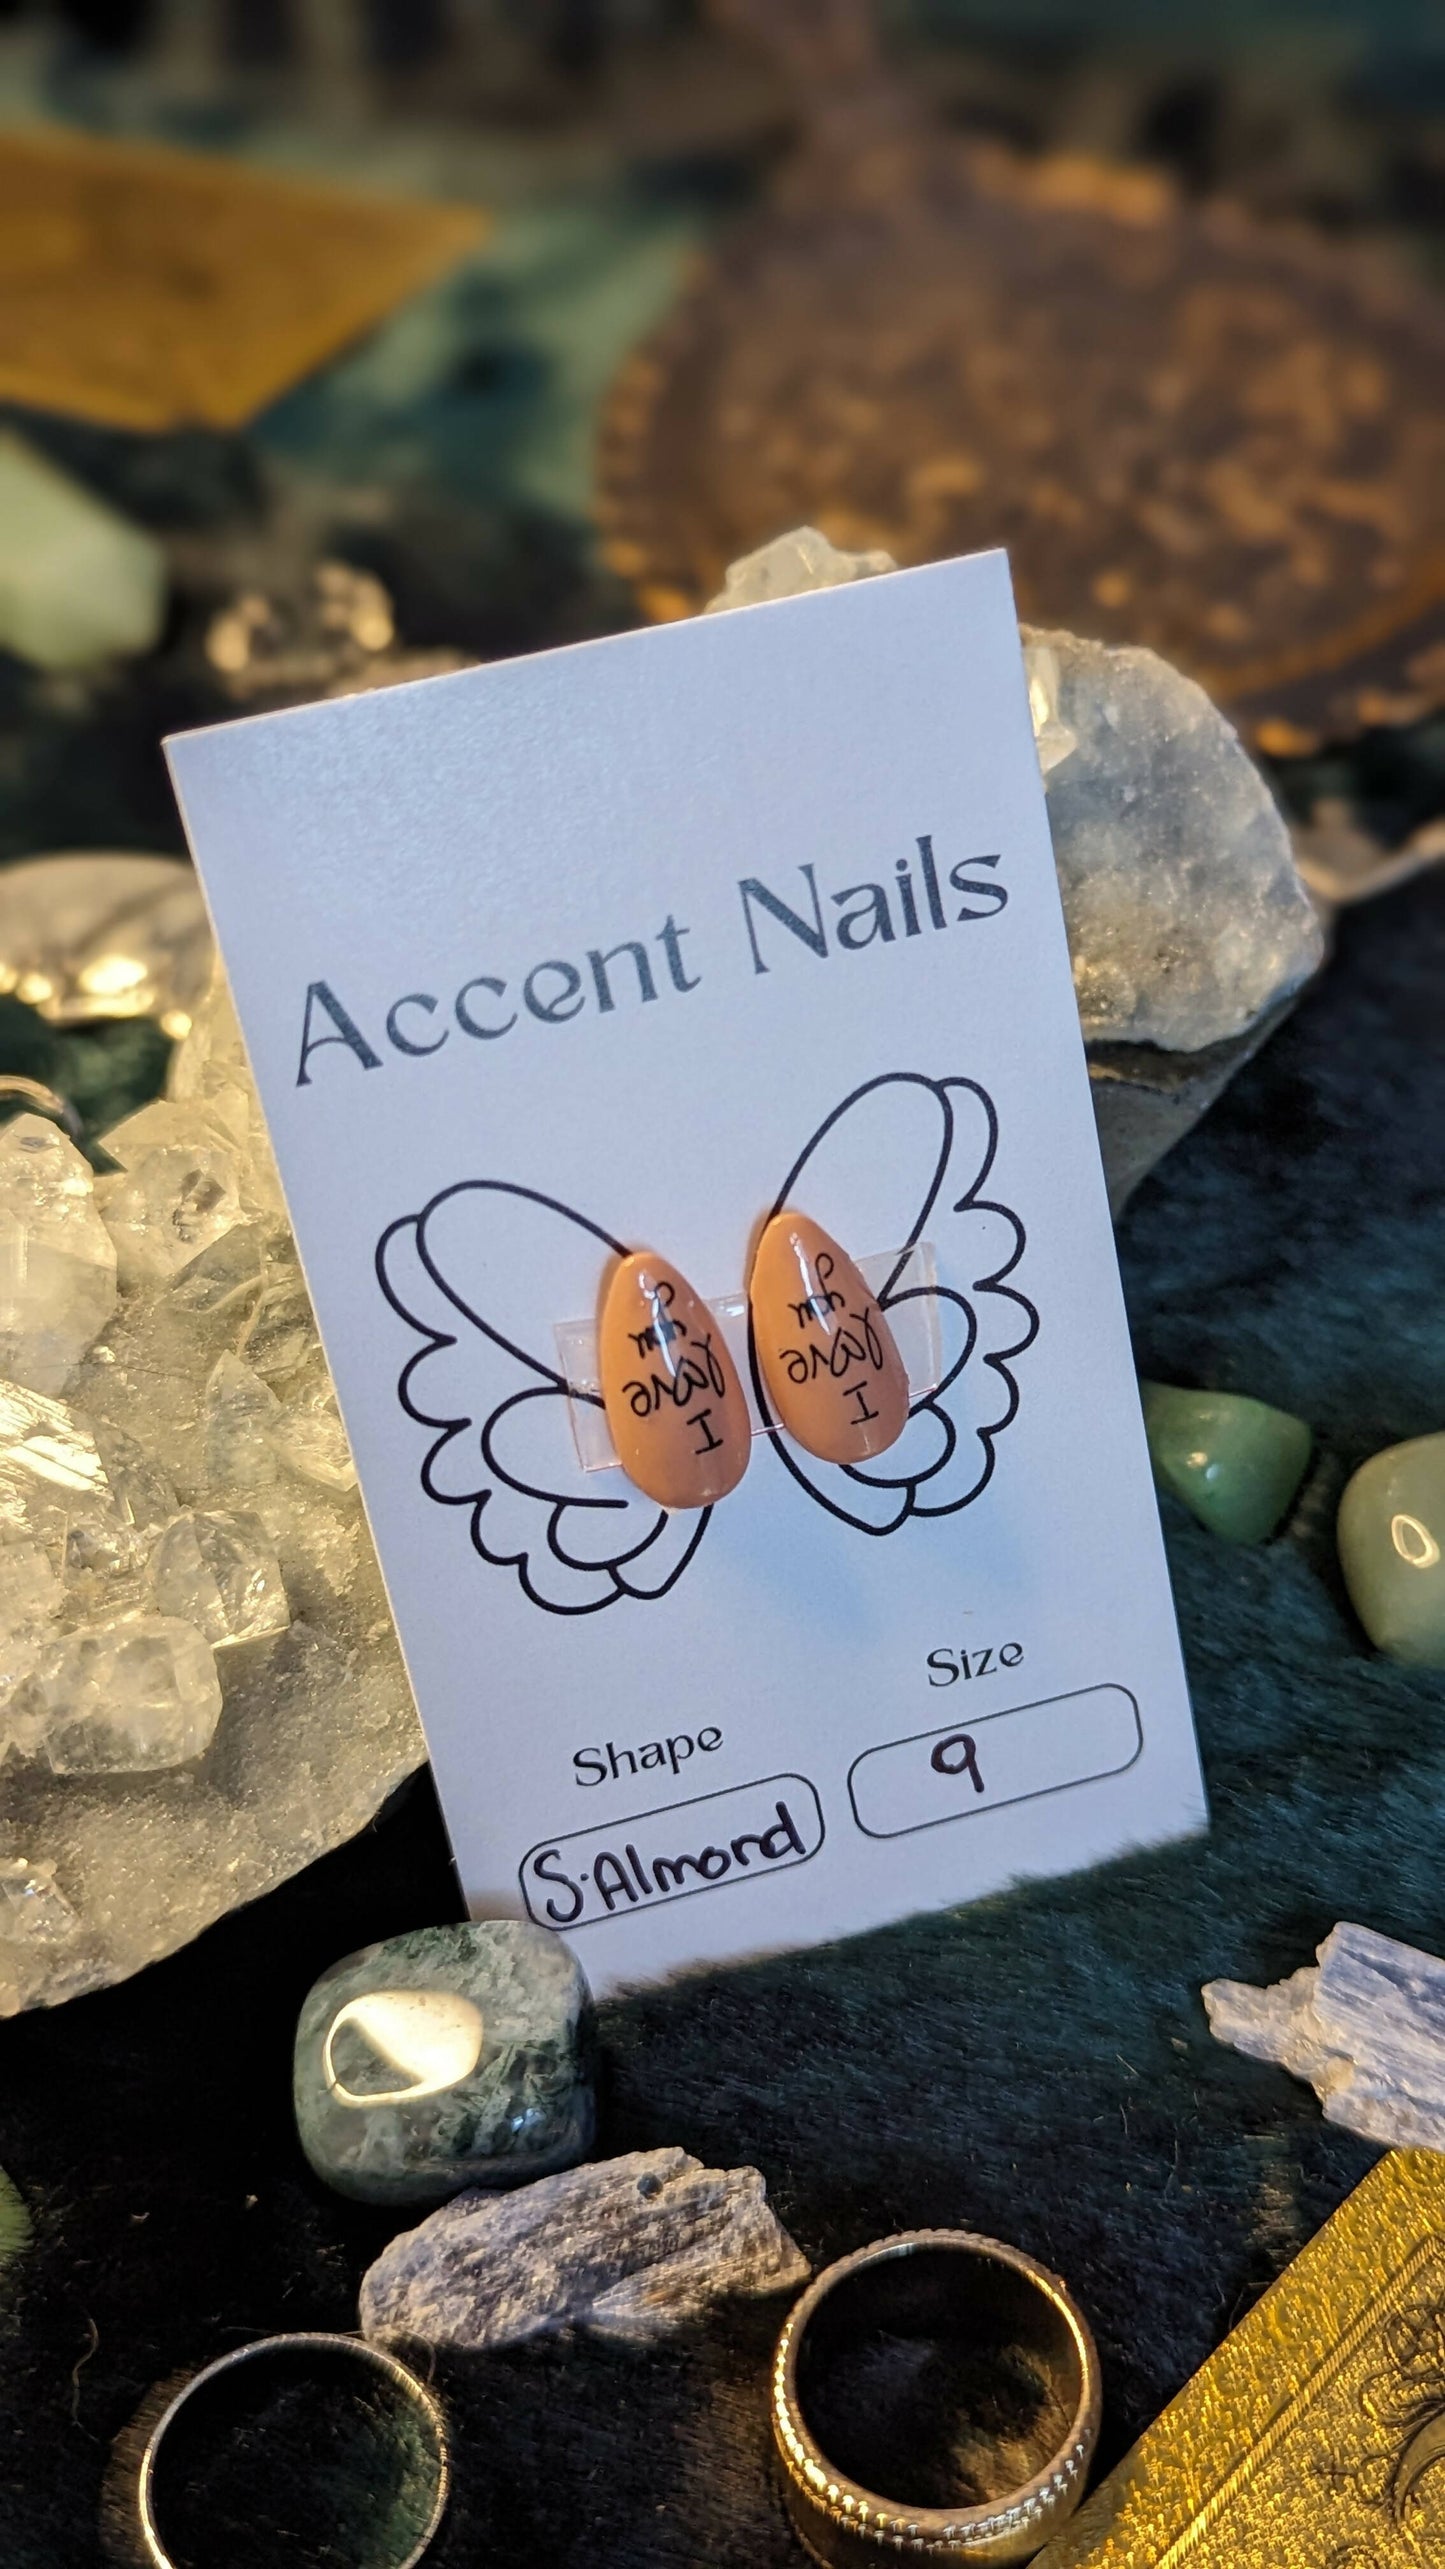 Accent Nails: I love you - Size 9